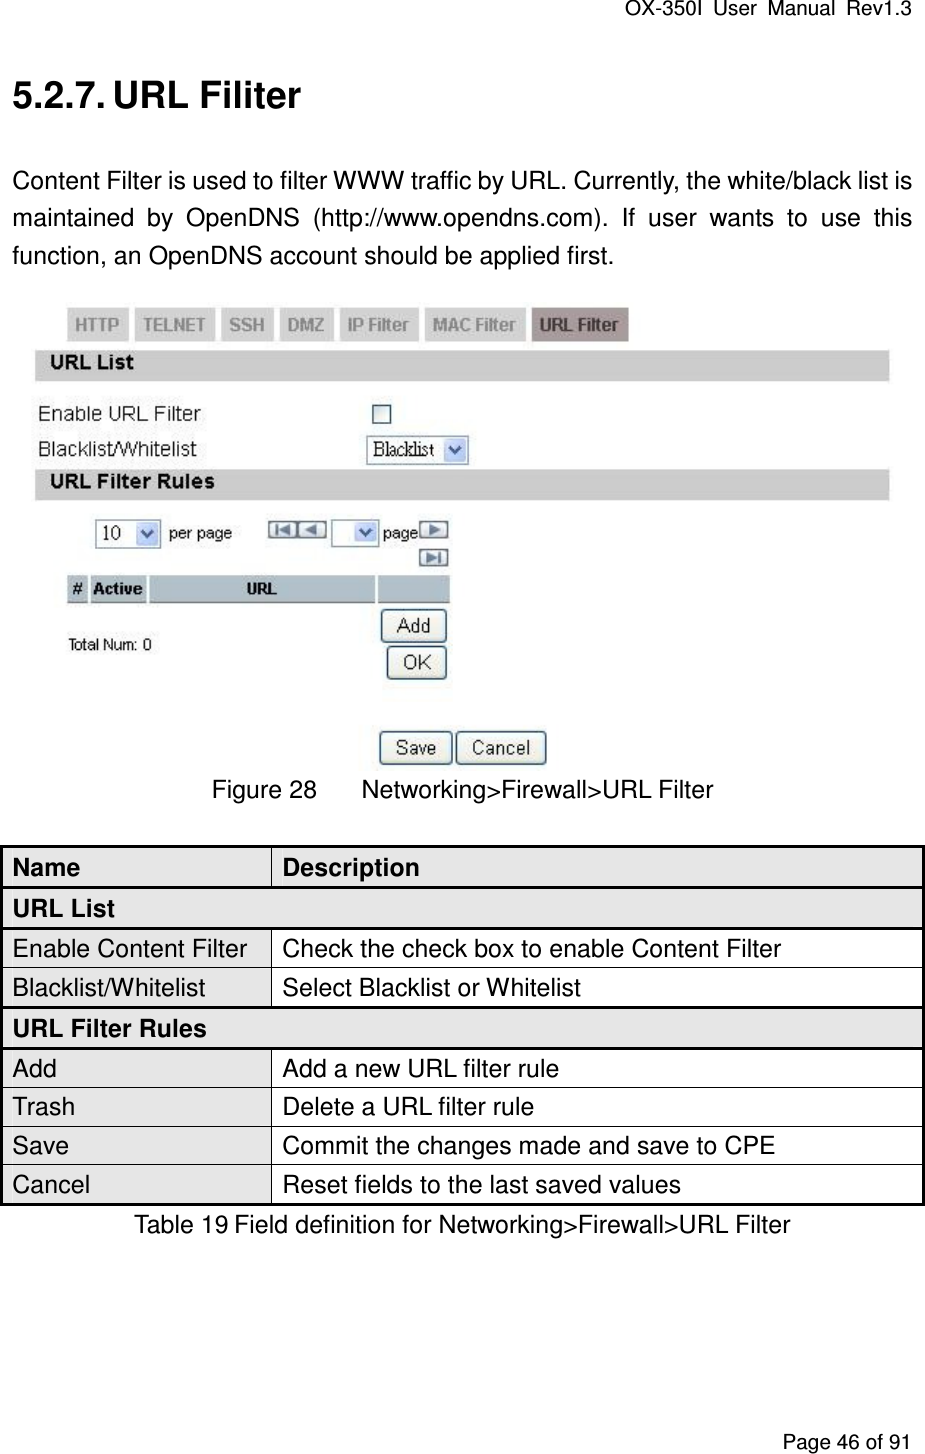 OX-350I  User  Manual  Rev1.3 Page 46 of 91 5.2.7. URL Filiter Content Filter is used to filter WWW traffic by URL. Currently, the white/black list is maintained  by  OpenDNS  (http://www.opendns.com).  If  user  wants  to  use  this function, an OpenDNS account should be applied first.  Figure 28  Networking&gt;Firewall&gt;URL Filter Name  Description URL List Enable Content Filter  Check the check box to enable Content Filter Blacklist/Whitelist  Select Blacklist or Whitelist URL Filter Rules Add  Add a new URL filter rule Trash  Delete a URL filter rule Save  Commit the changes made and save to CPE Cancel  Reset fields to the last saved values Table 19 Field definition for Networking&gt;Firewall&gt;URL Filter 